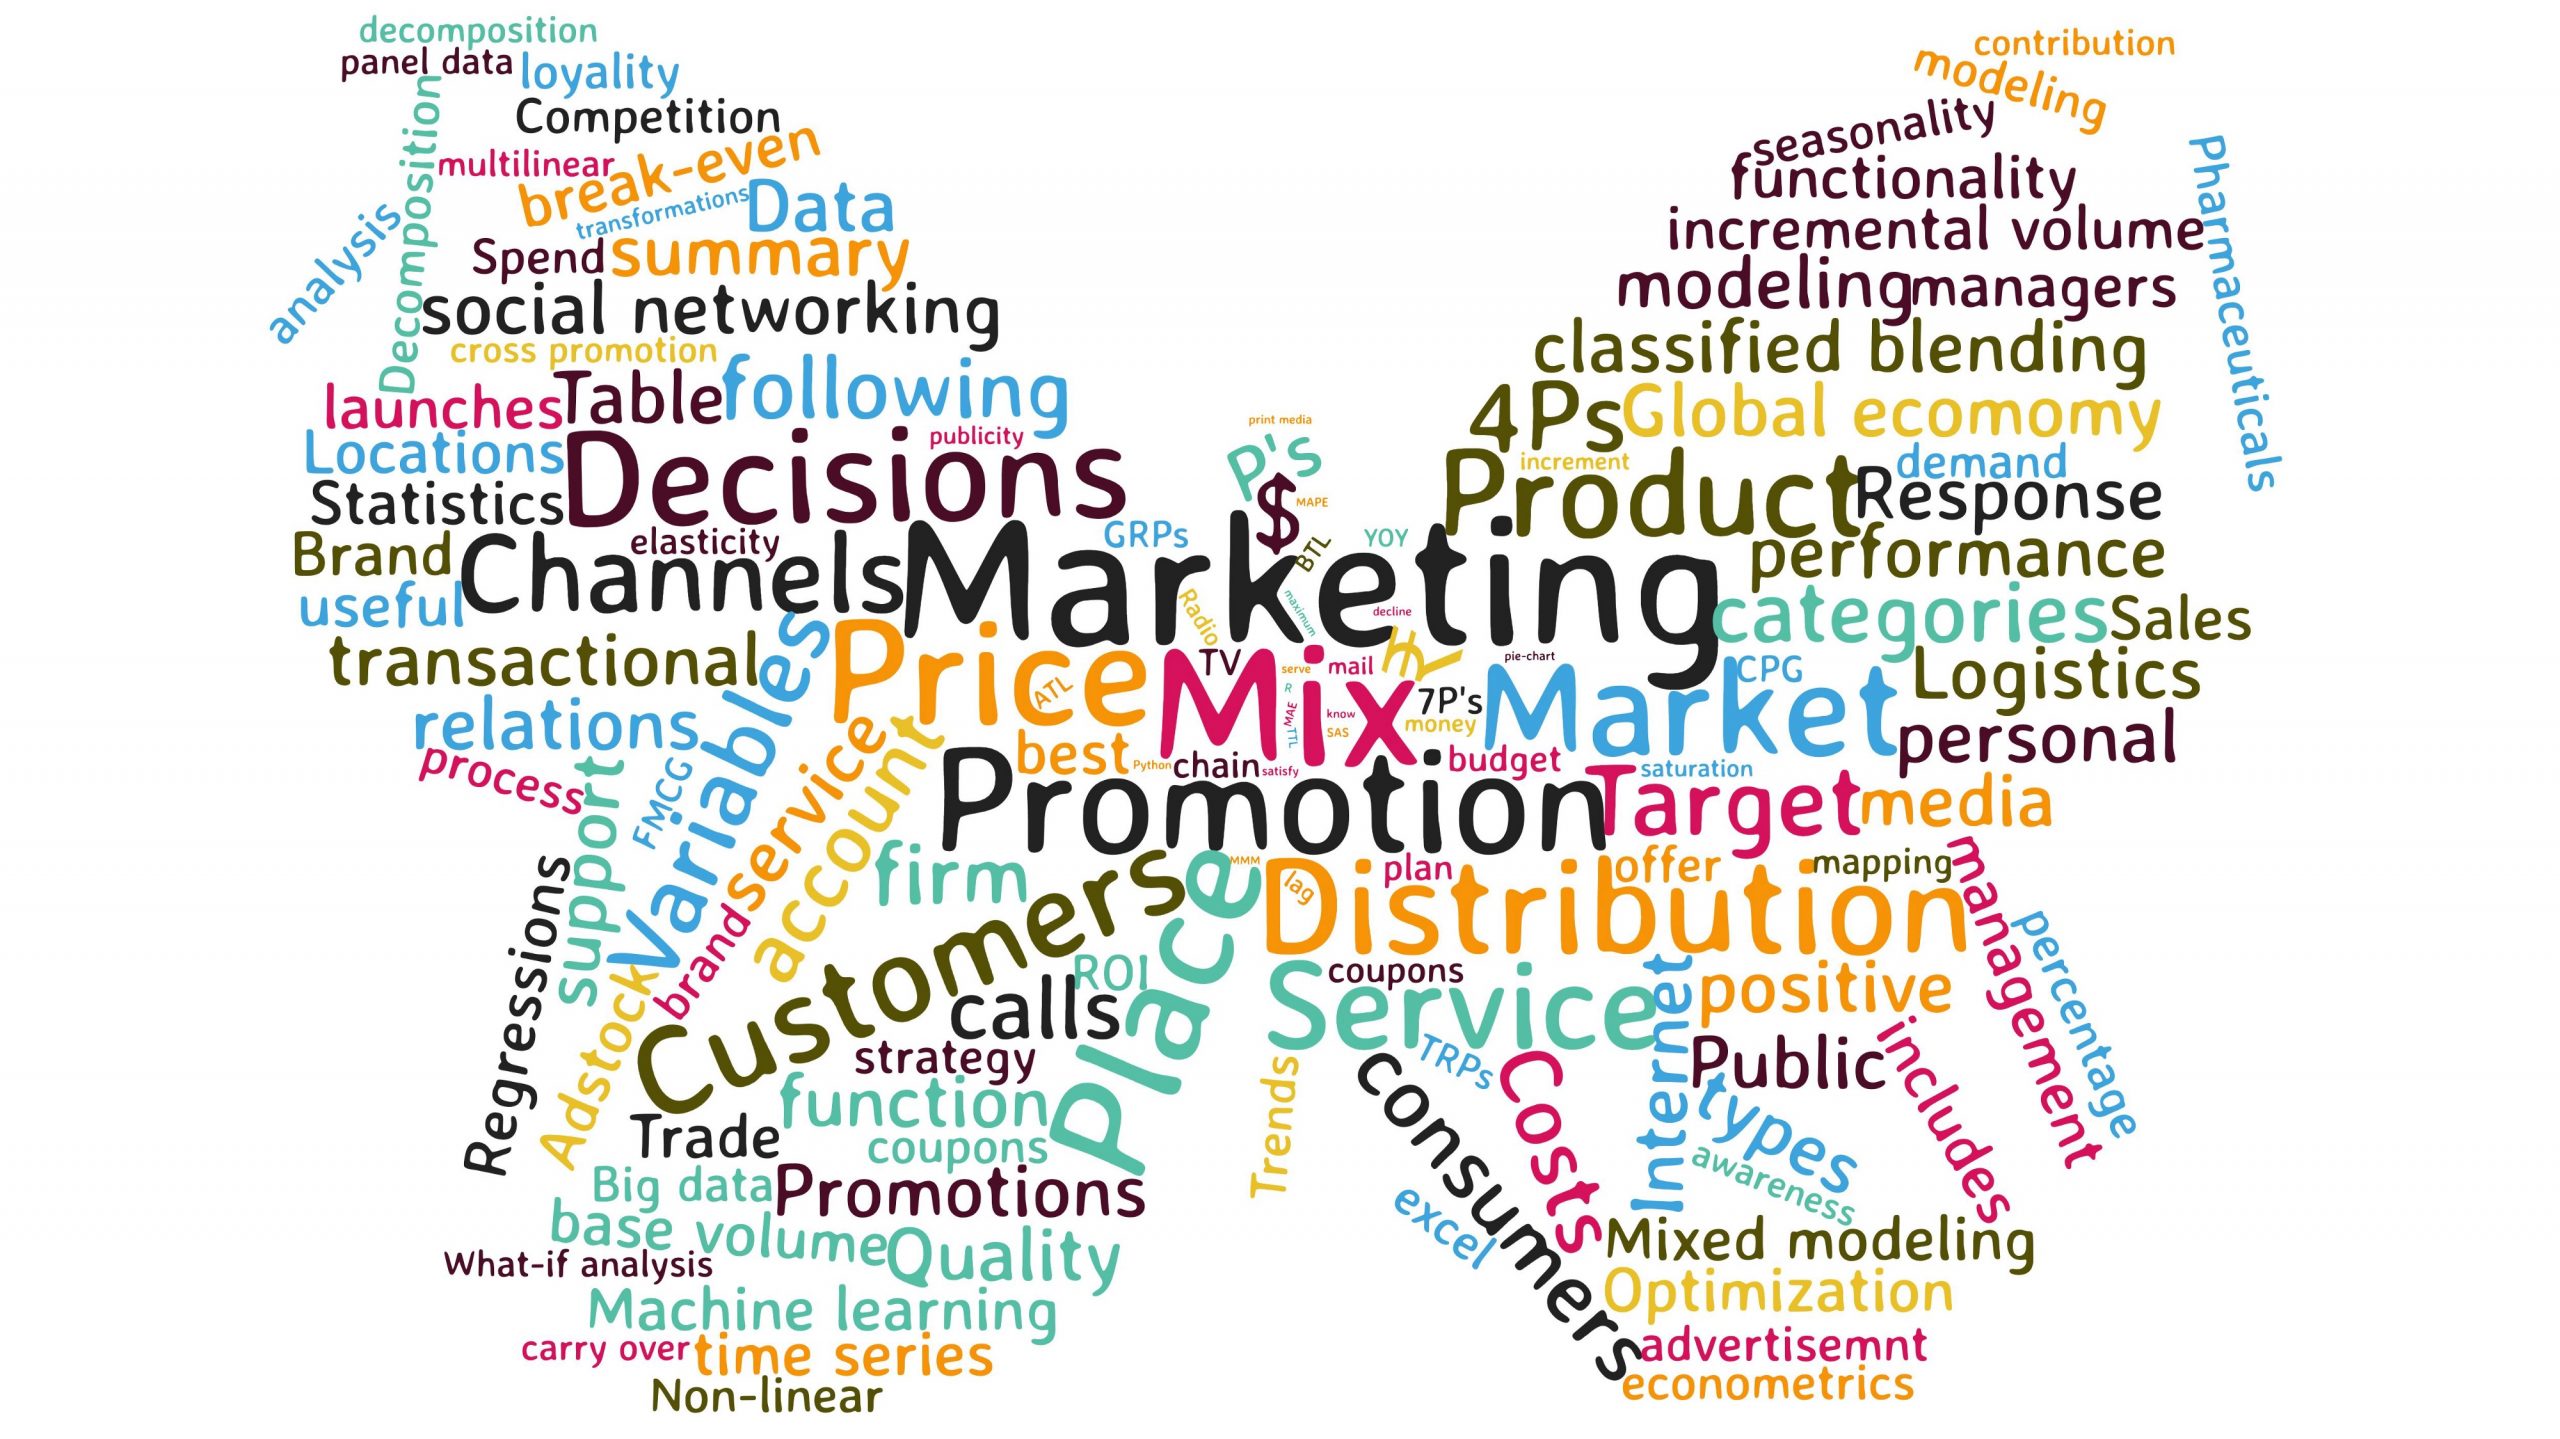 Marketing Mix Modelling (MMM) — a potential solution